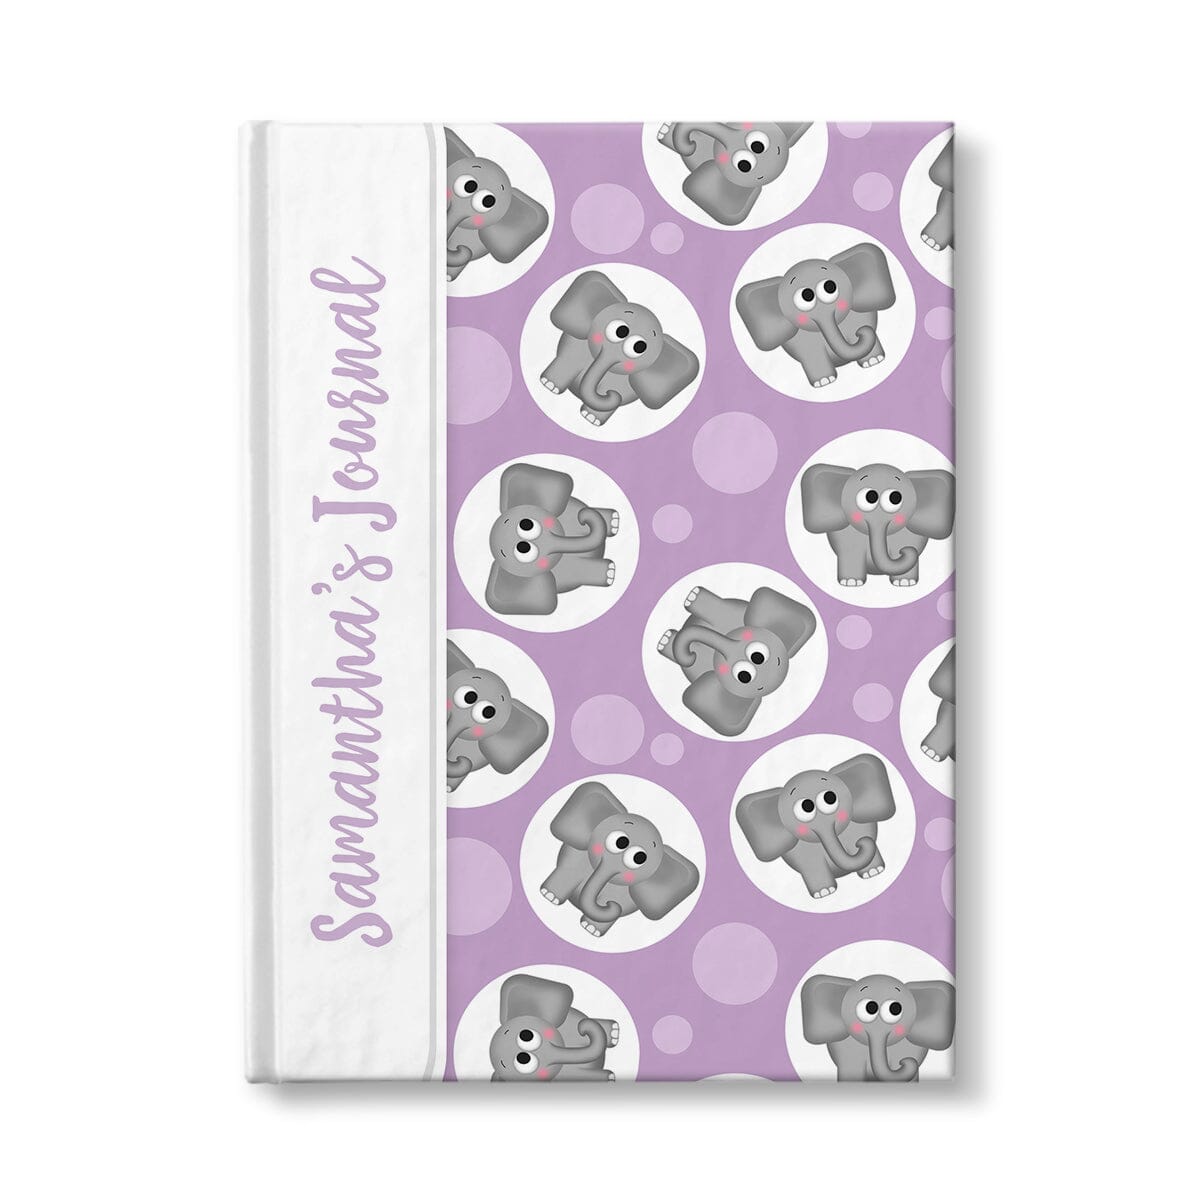 Personalized Cute Purple Elephant Journal at Artistically Invited.